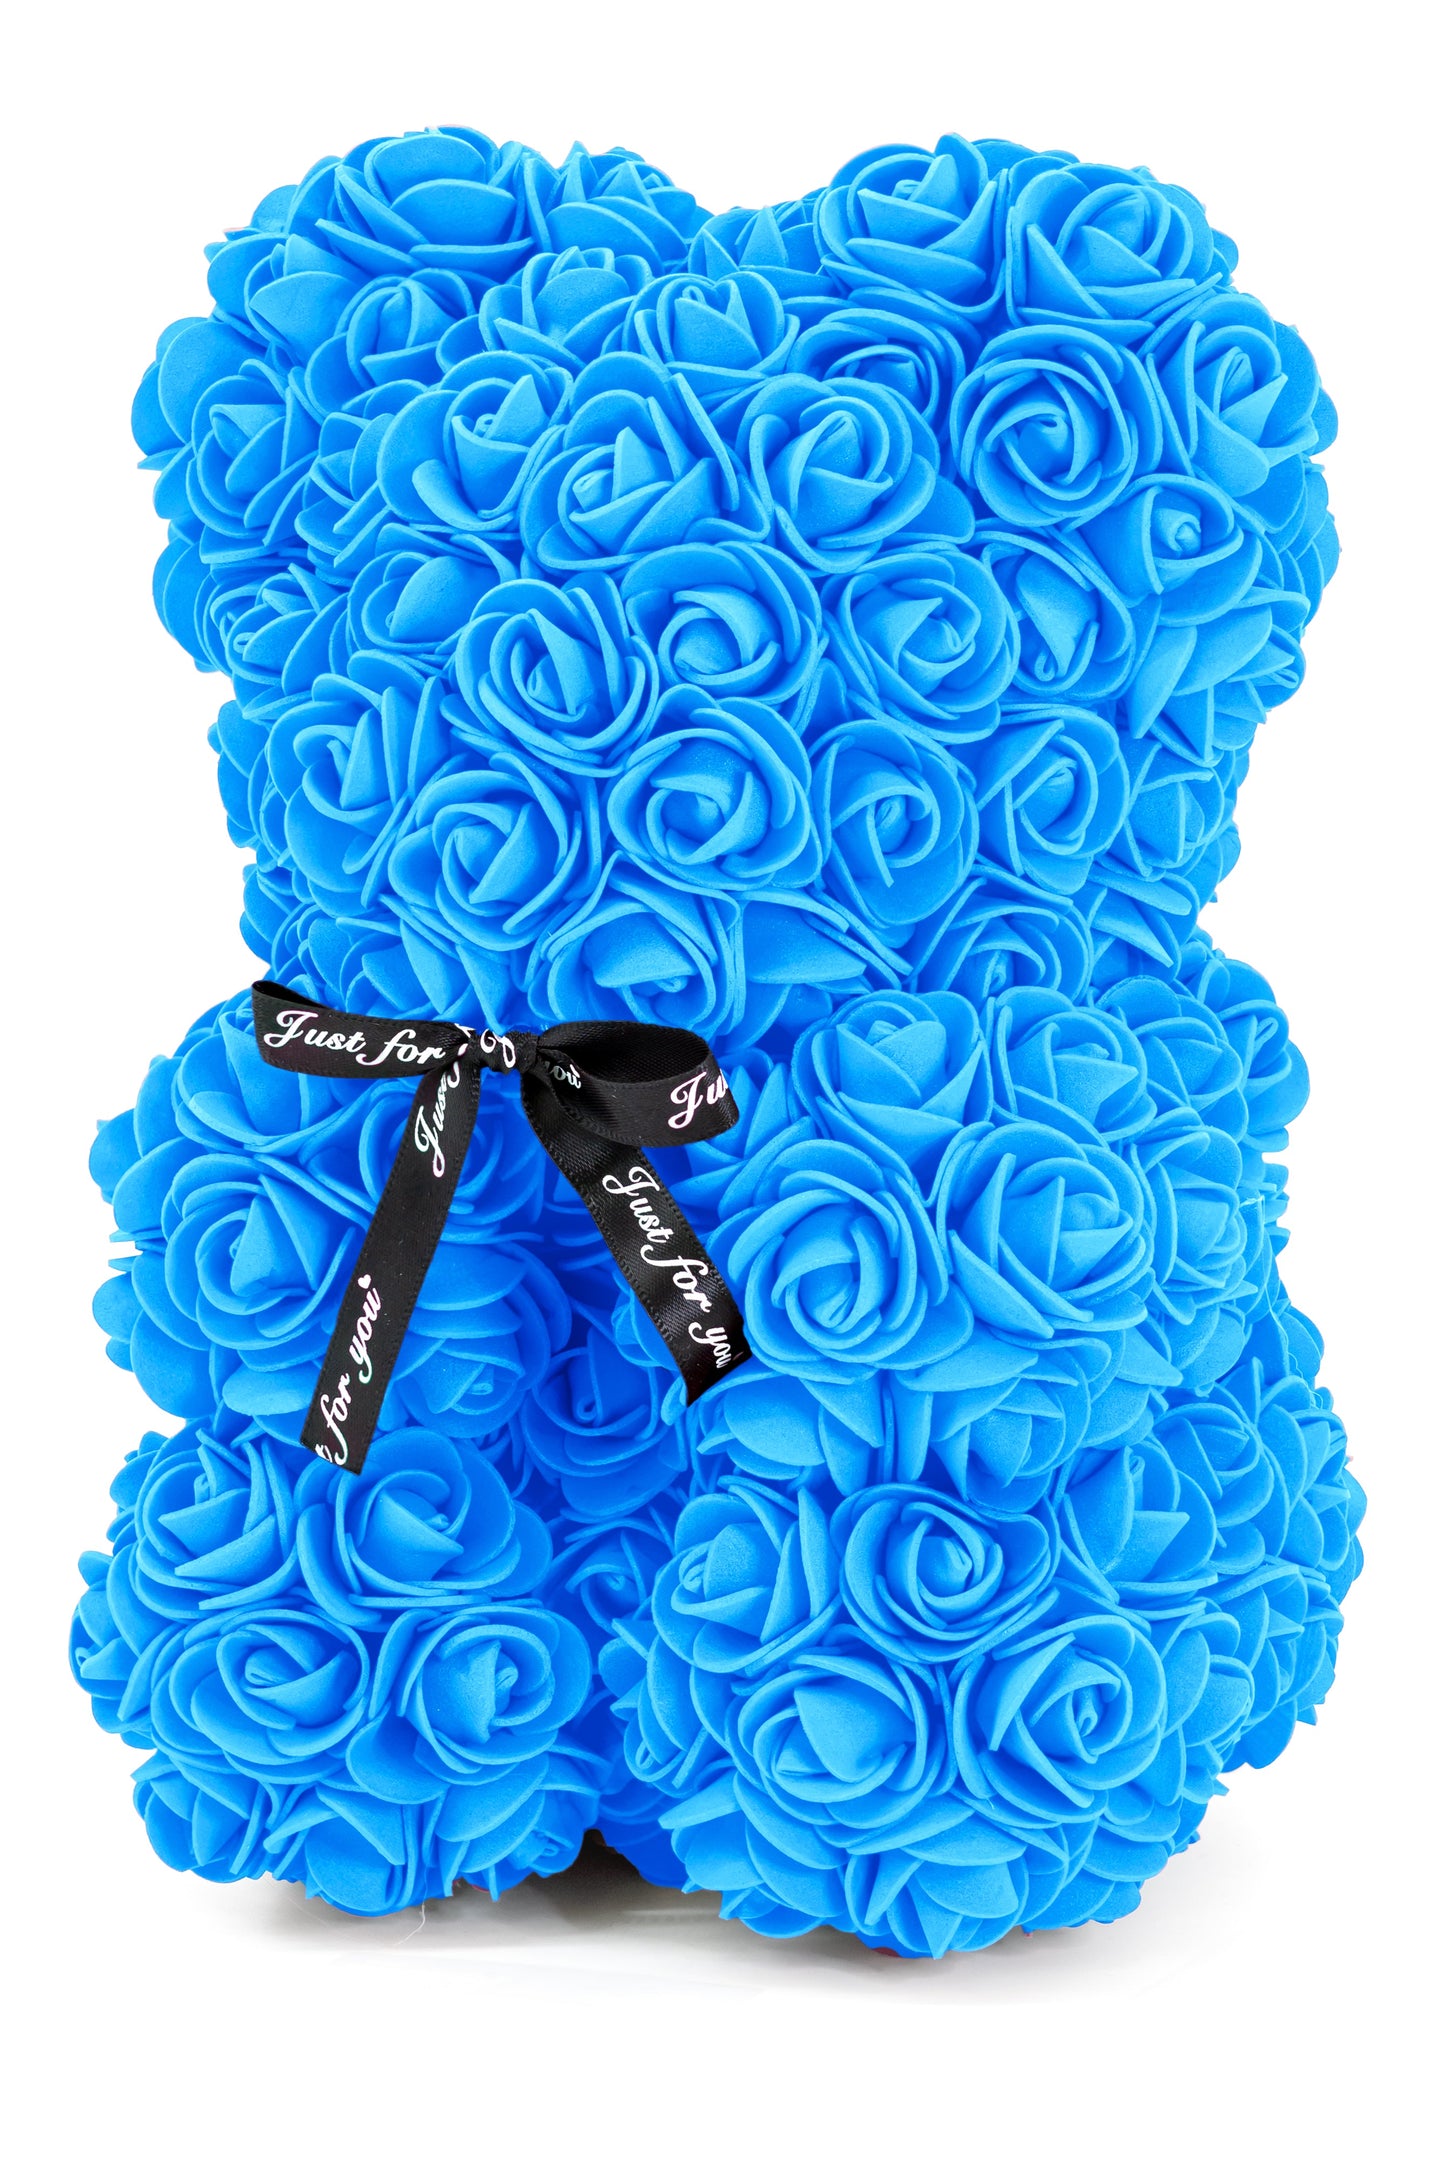 A bear shaped product covered in foam roses in the color blue.